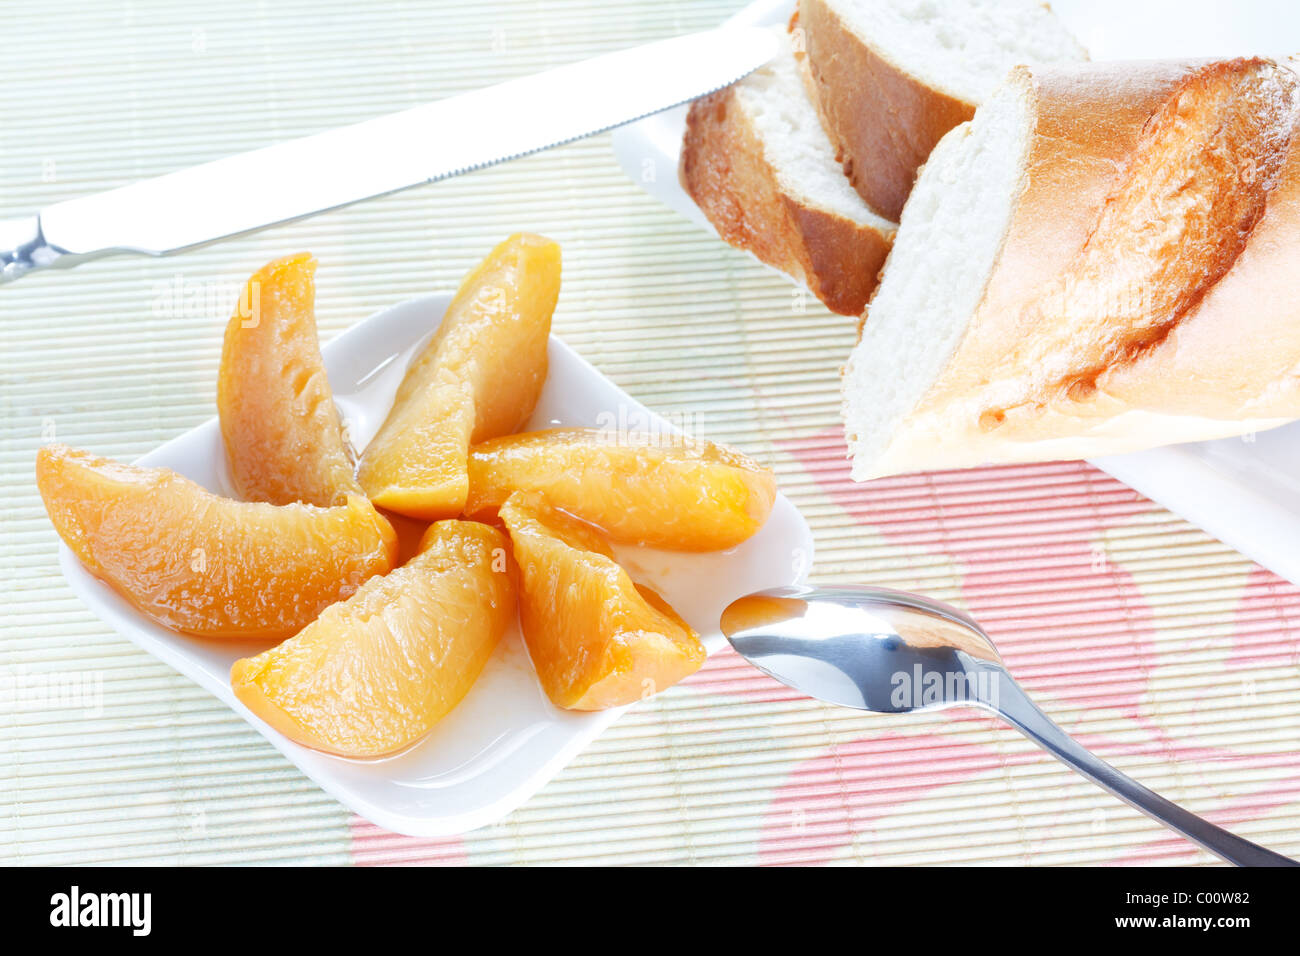 Crisp fresh-baked baguette on white plate, peach dessert, spoon and knife on bamboo placemat Stock Photo